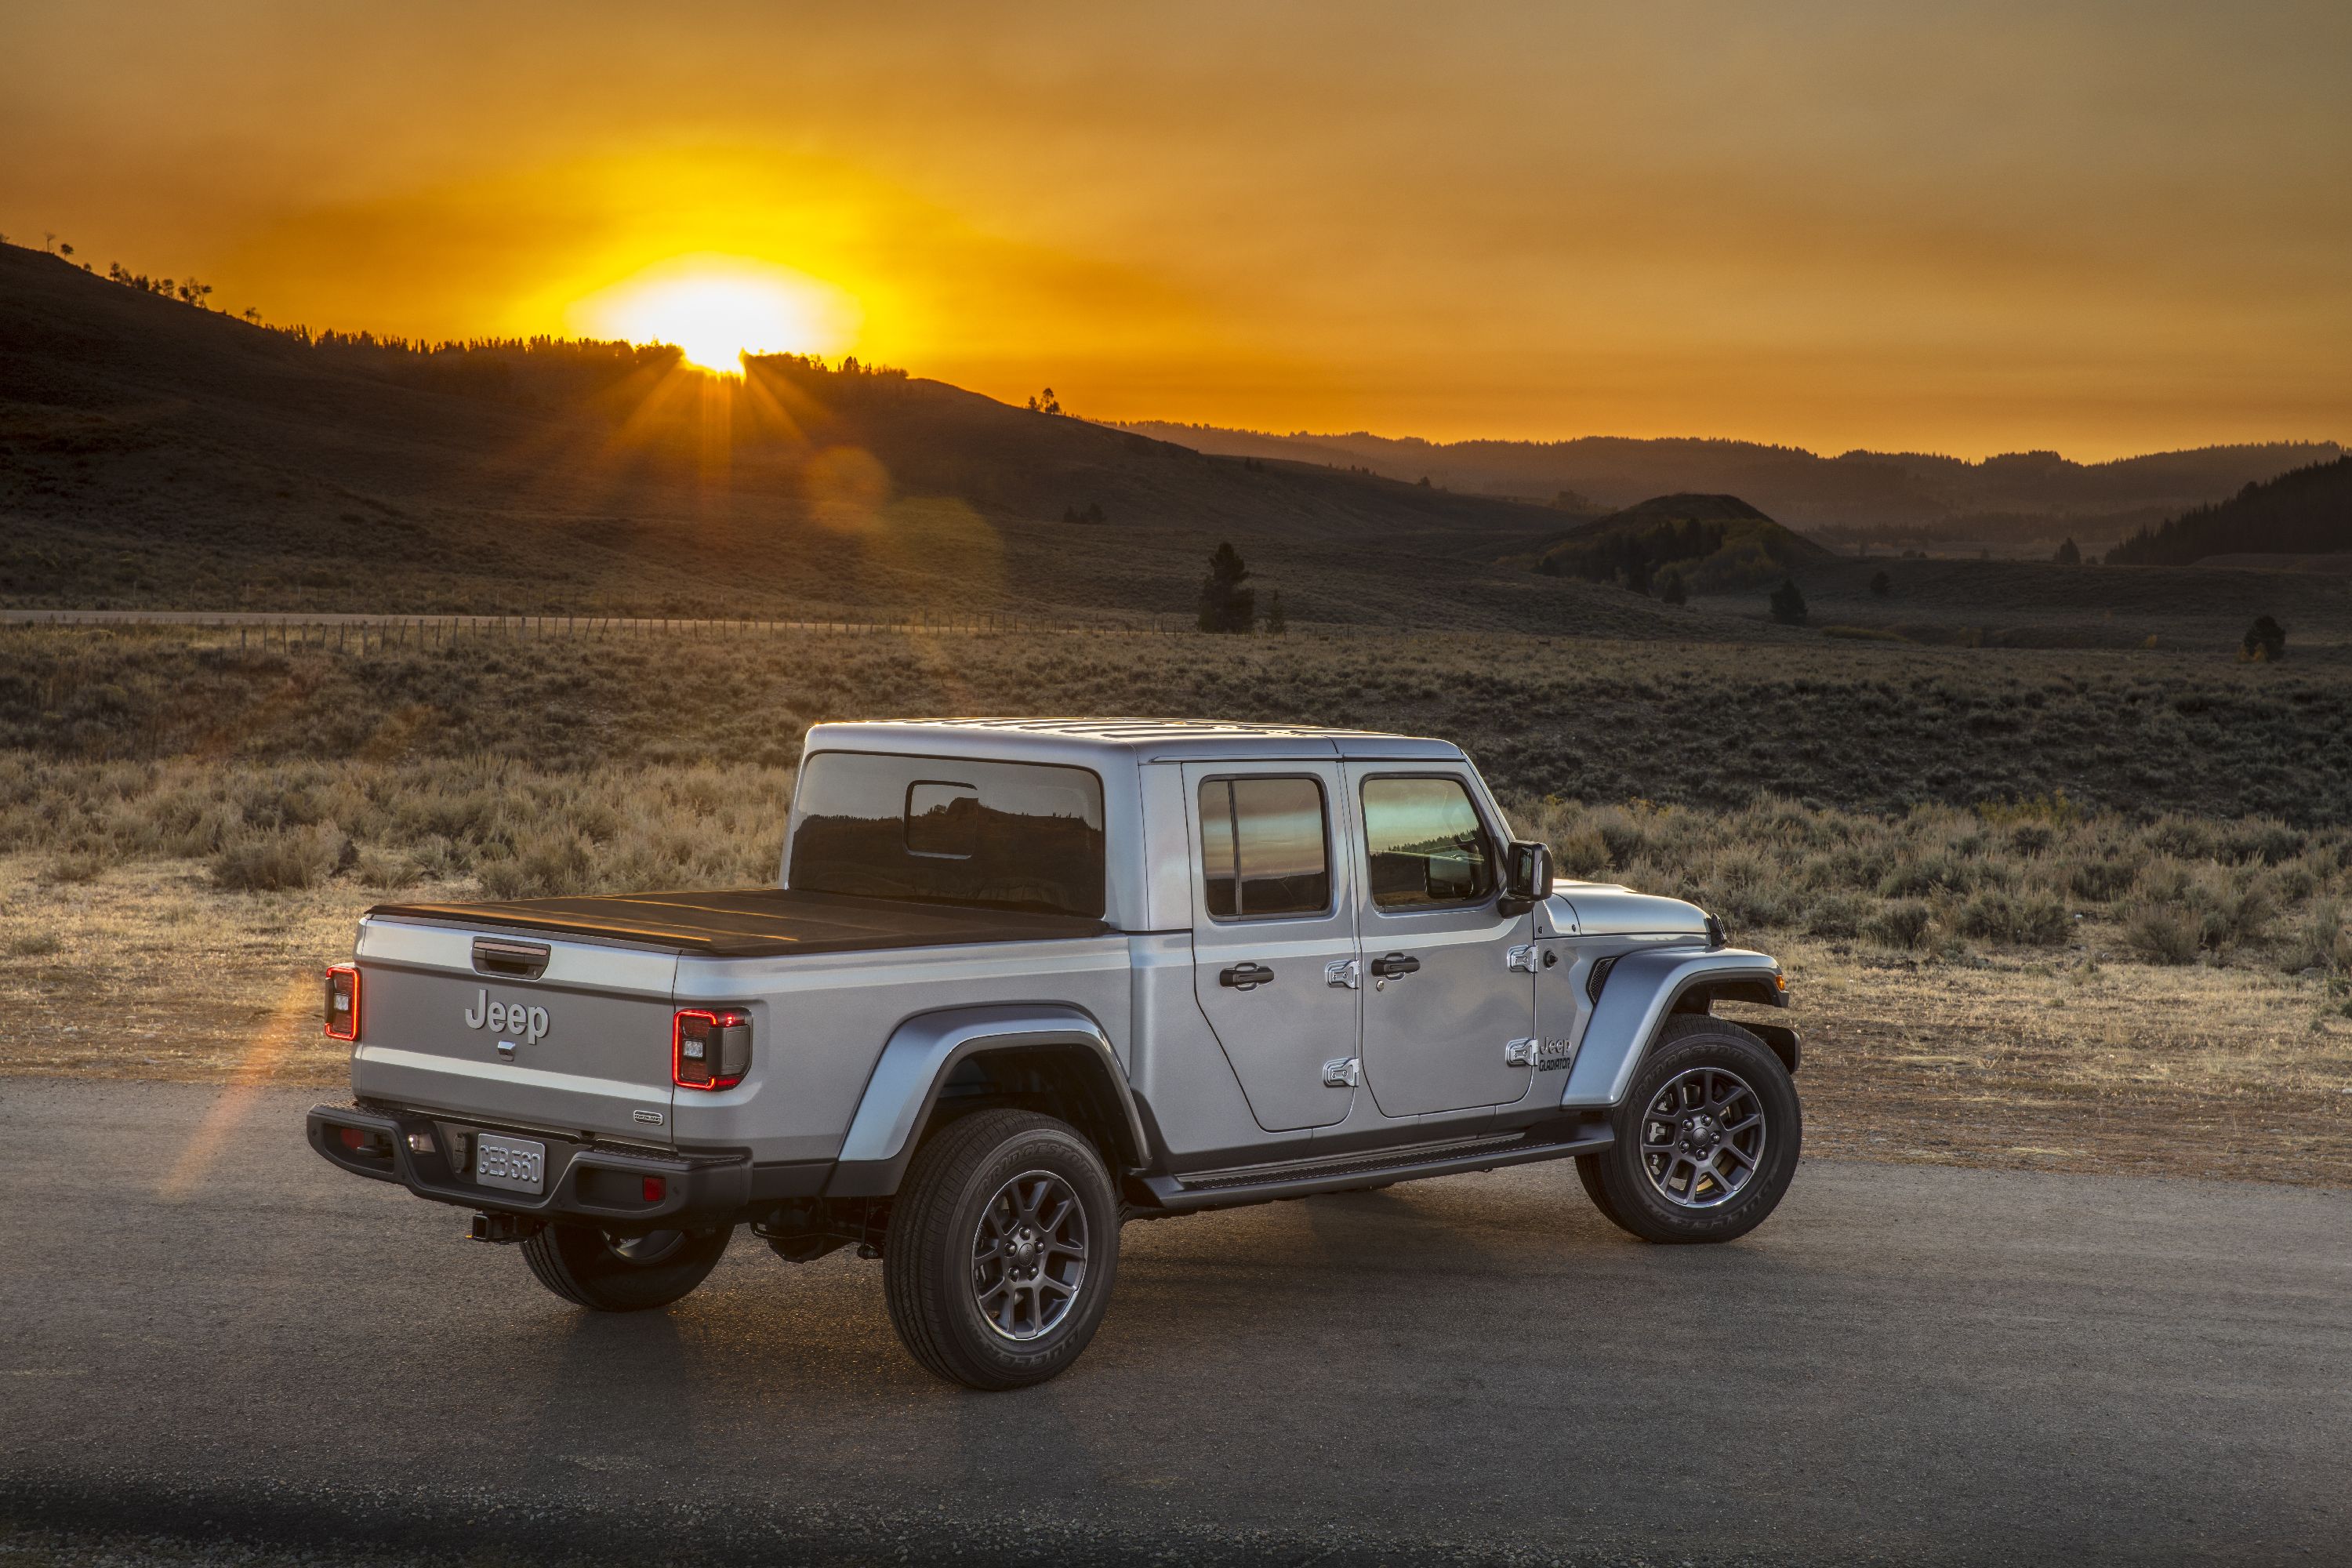 2021 Jeep Gladiator Details Leaked On Willys Anniversary Models